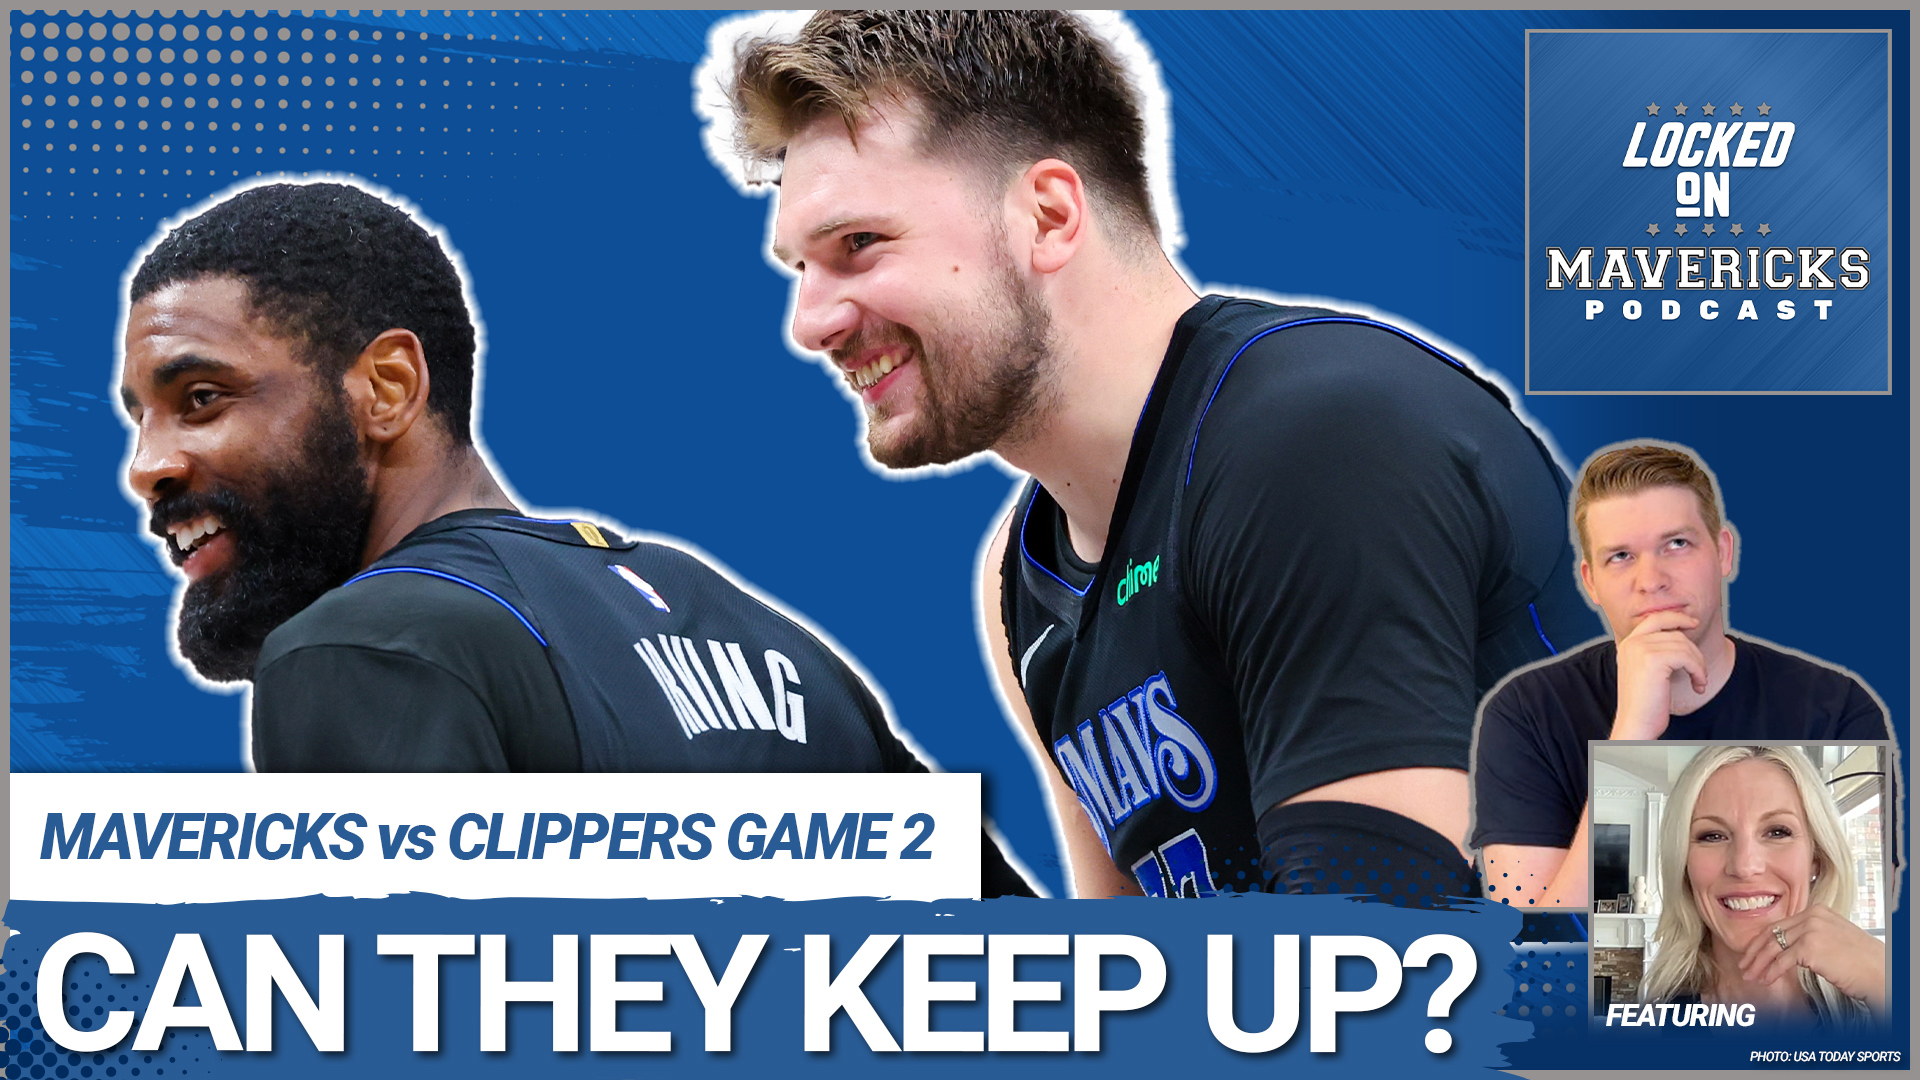 Nick Angstadt & Dana Larson share their thoughts on Luka Doncic & Kyrie Irving's energy and more on the Dallas Mavericks vs Los Angeles Clippers series.